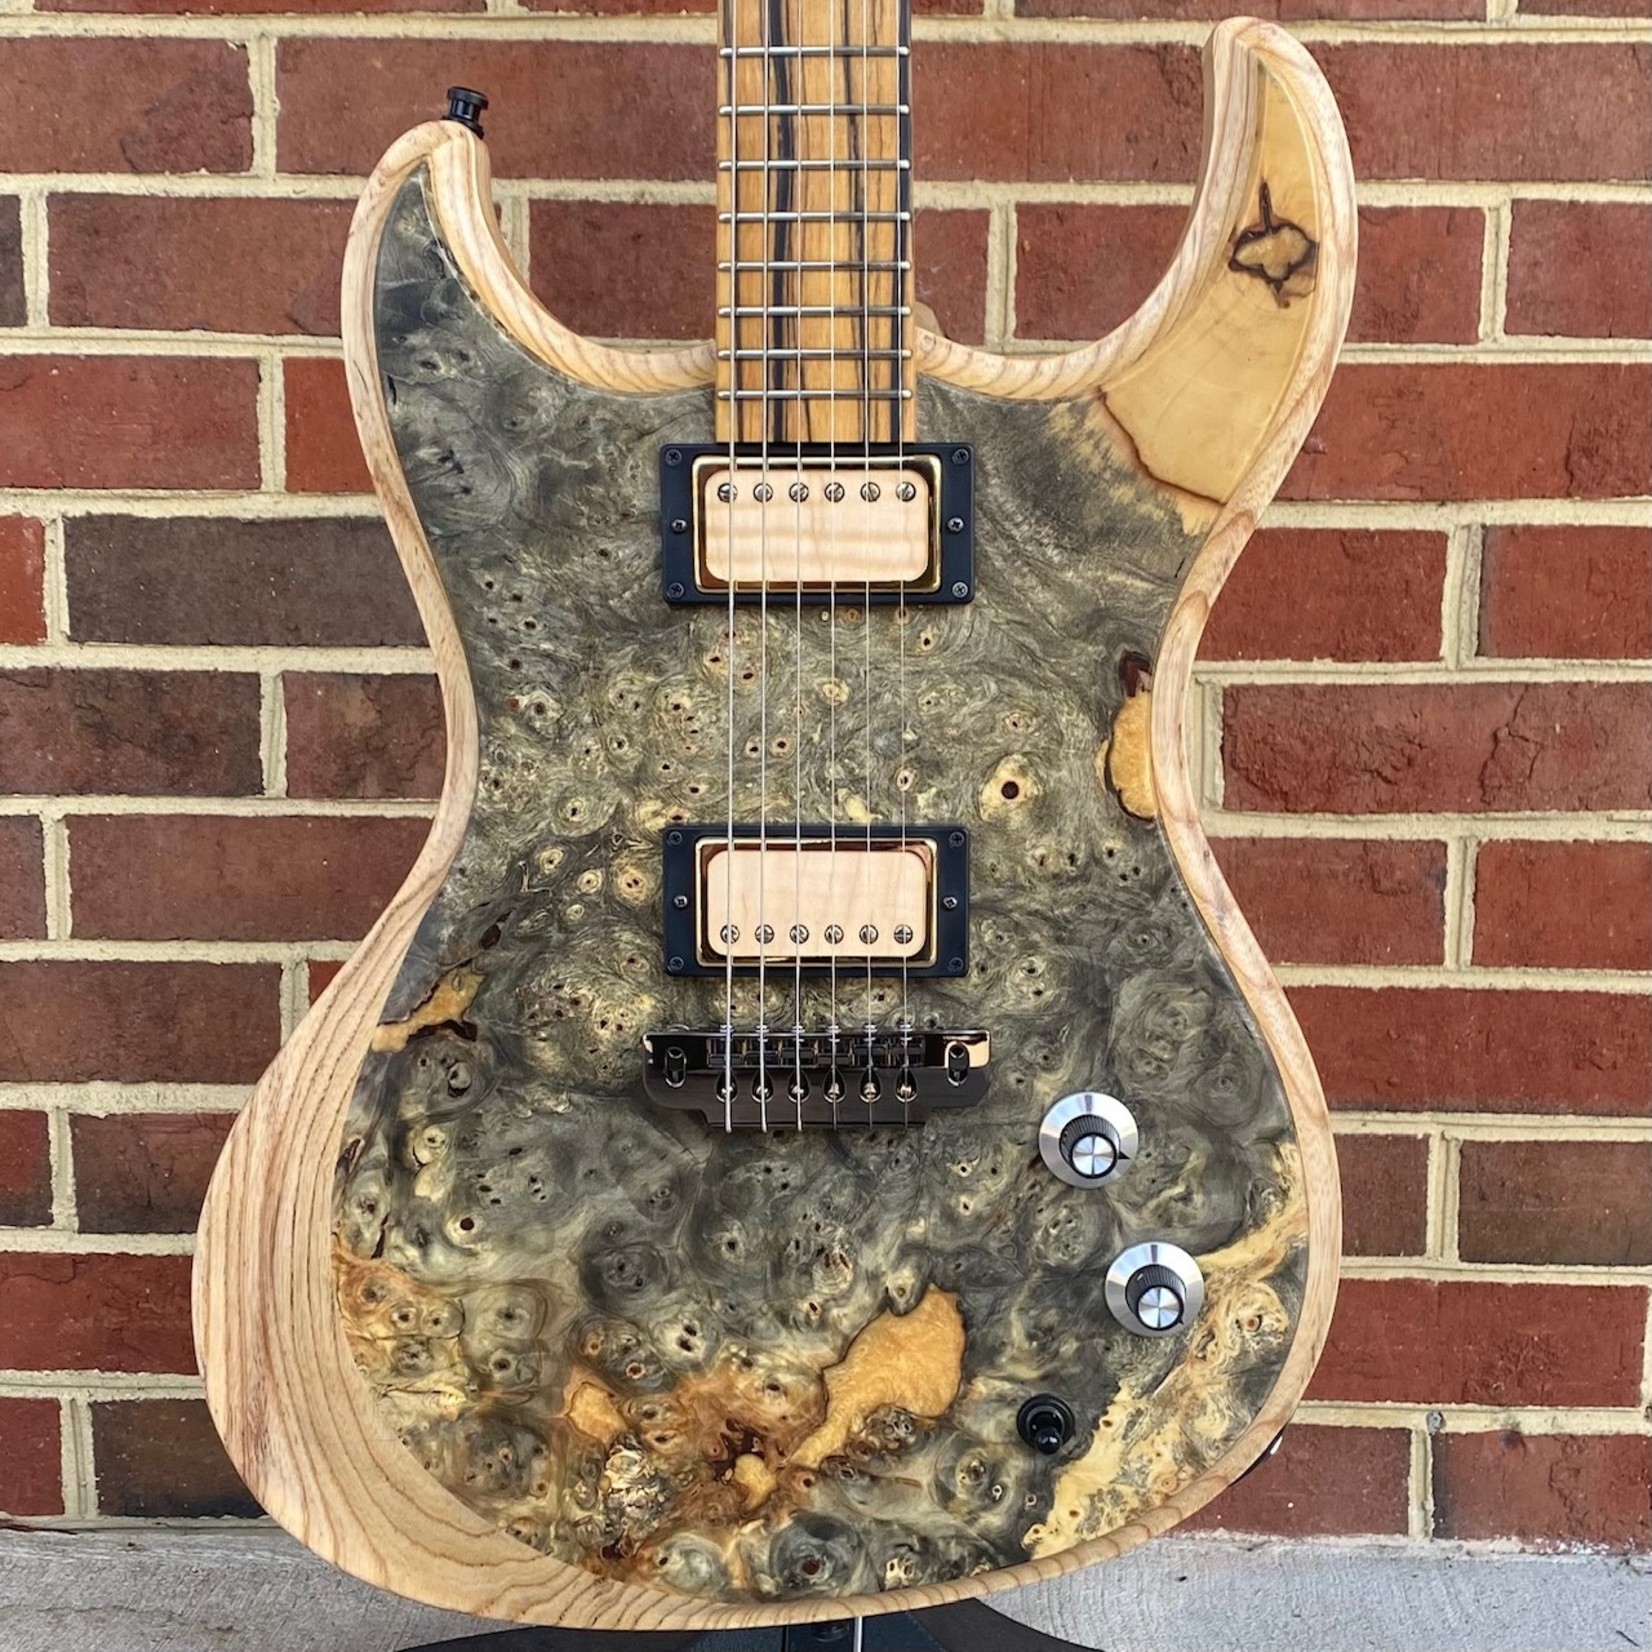 Dunable Guitars Dunable Guitars USA Special Stash #1 - Gnarwhal, One Piece Buckeye Burl Top w/ Gold Sparkle Resin Fill, Swamp Ash Body, Pale Moon Ebony Neck, Pale Moon Ebony Fretboard, Hardshell Case